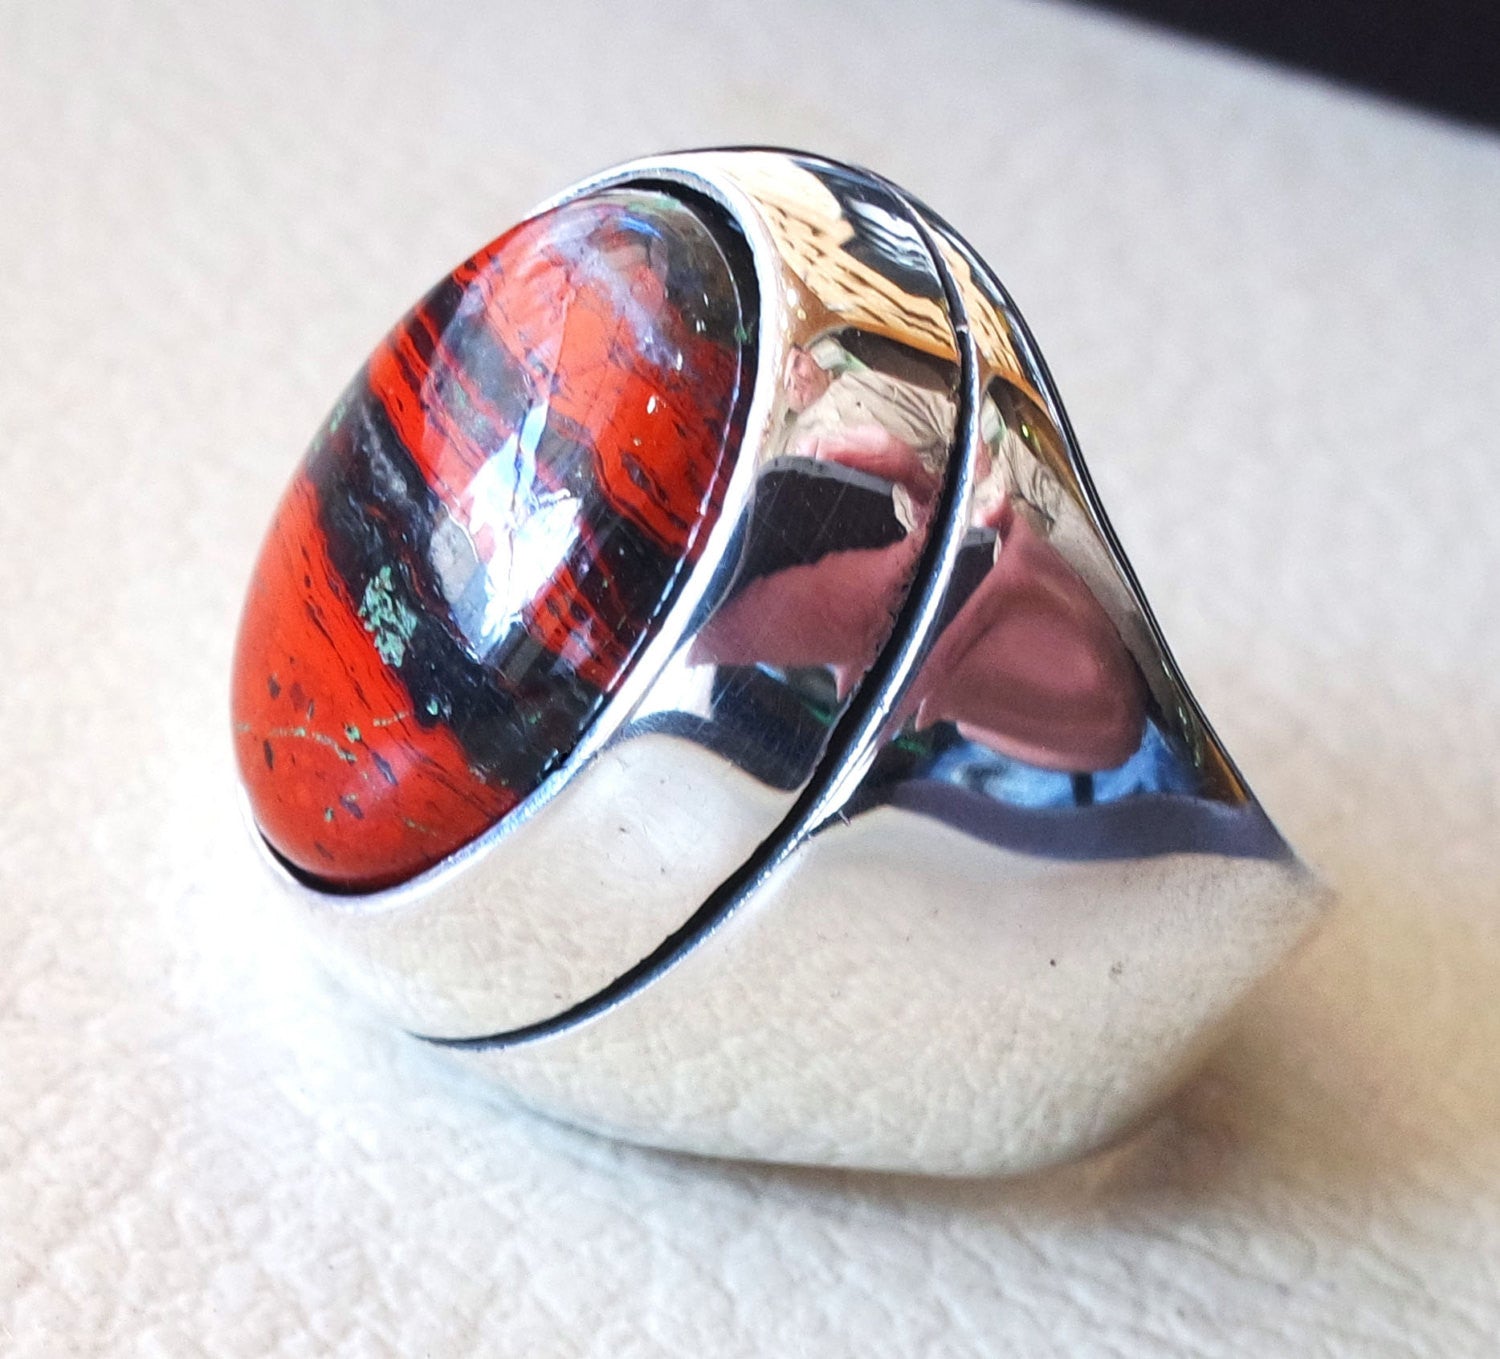 snake skin jasper stone natural gem sterling silver 925 heavy ring red and black oval semi precious cabochon man ring jewelry all sizes